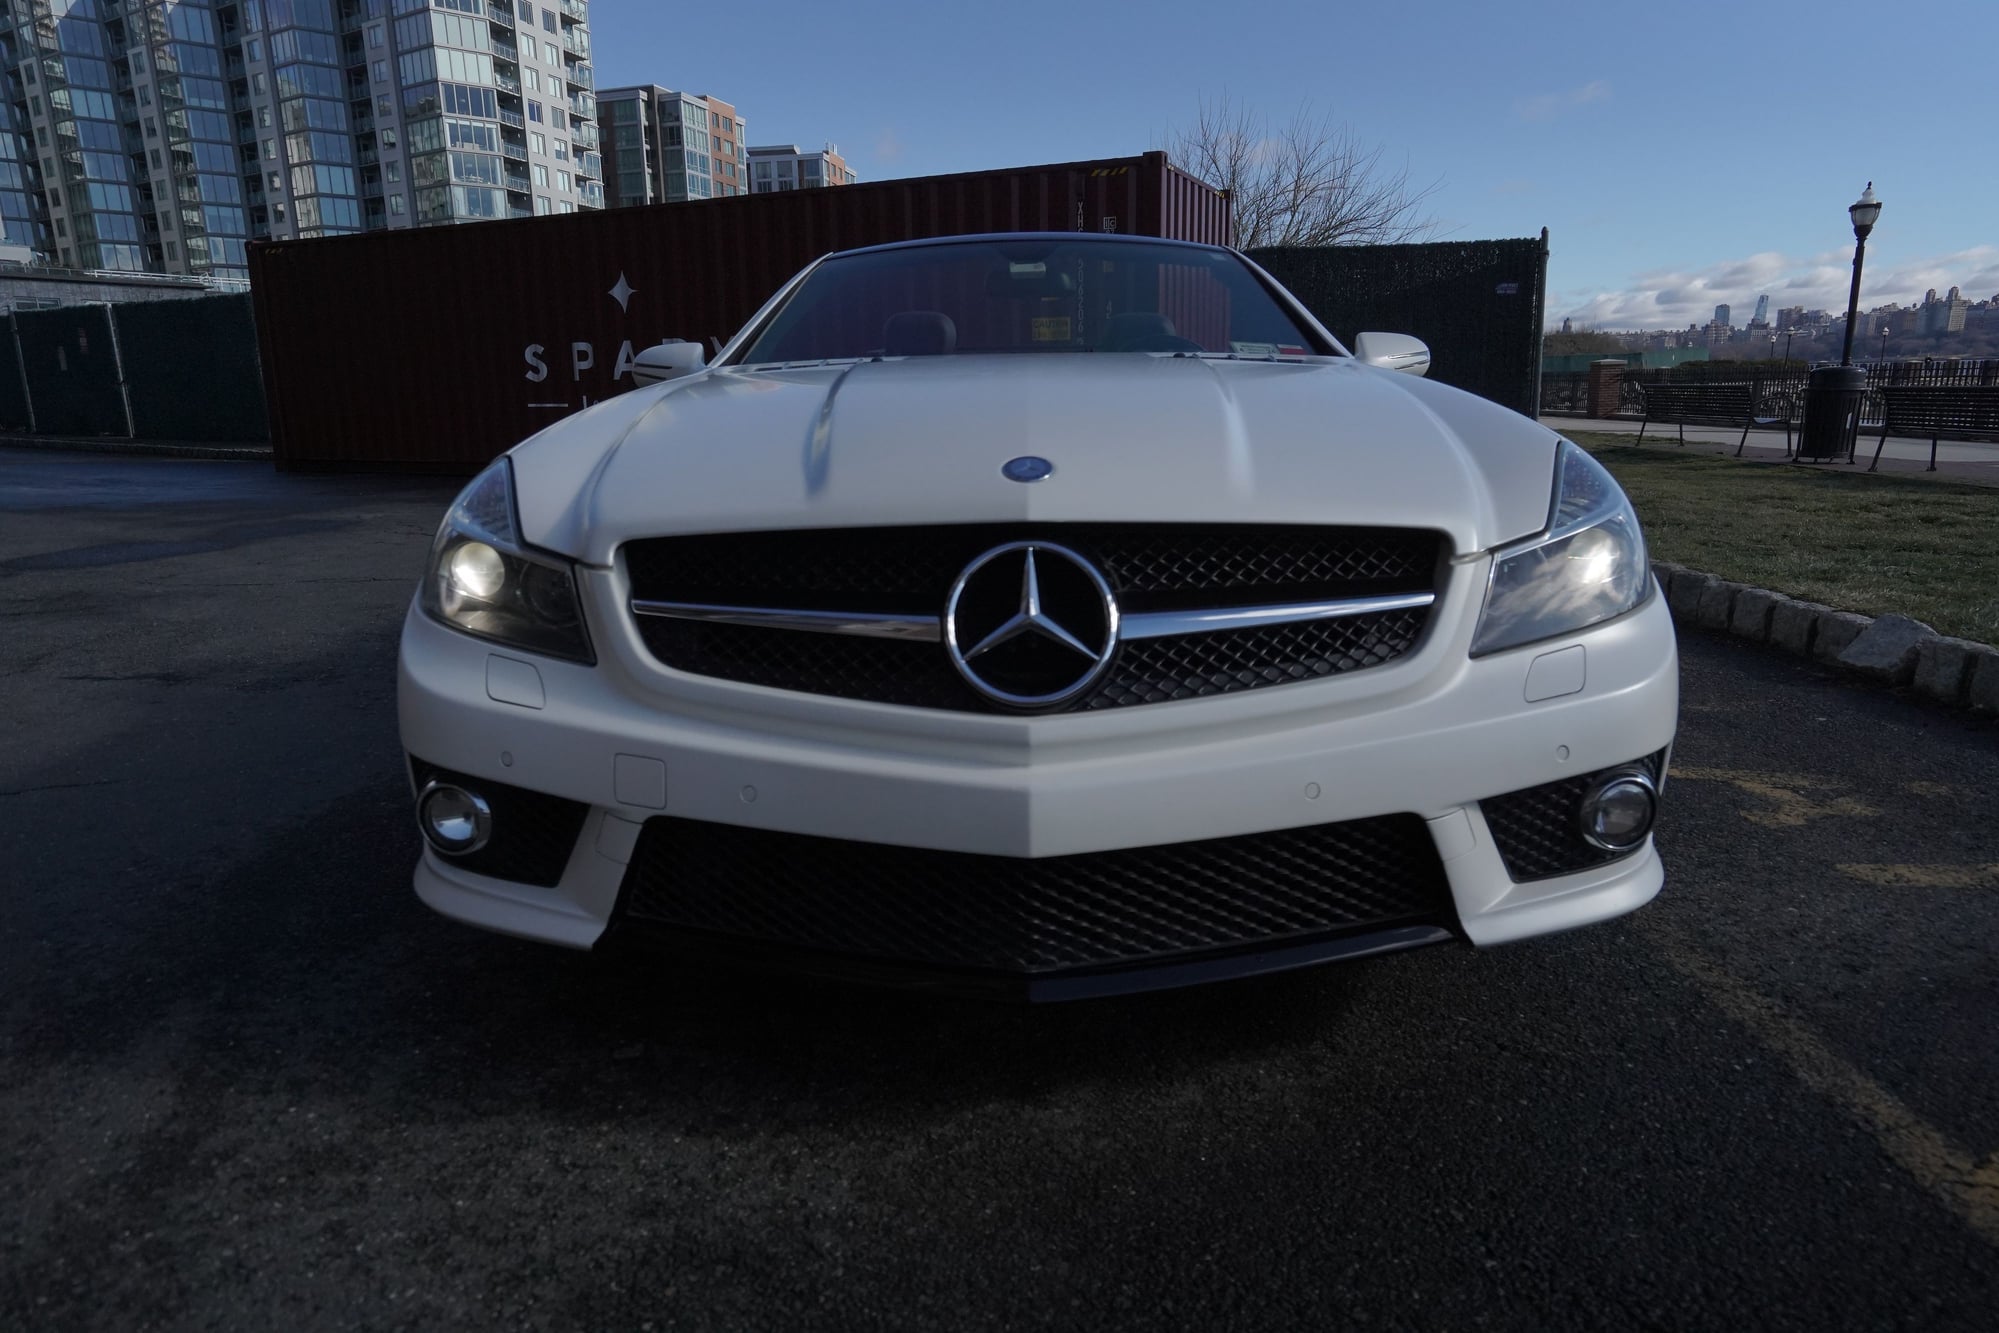 2009 Mercedes-Benz SL63 AMG - 2009 SL63 IWC Edition - Excellent Condition - 49k Miles - Used - VIN WDBSK70F99F156451 - 8 cyl - 2WD - Automatic - Convertible - White - Edgewater, NJ 07047, United States